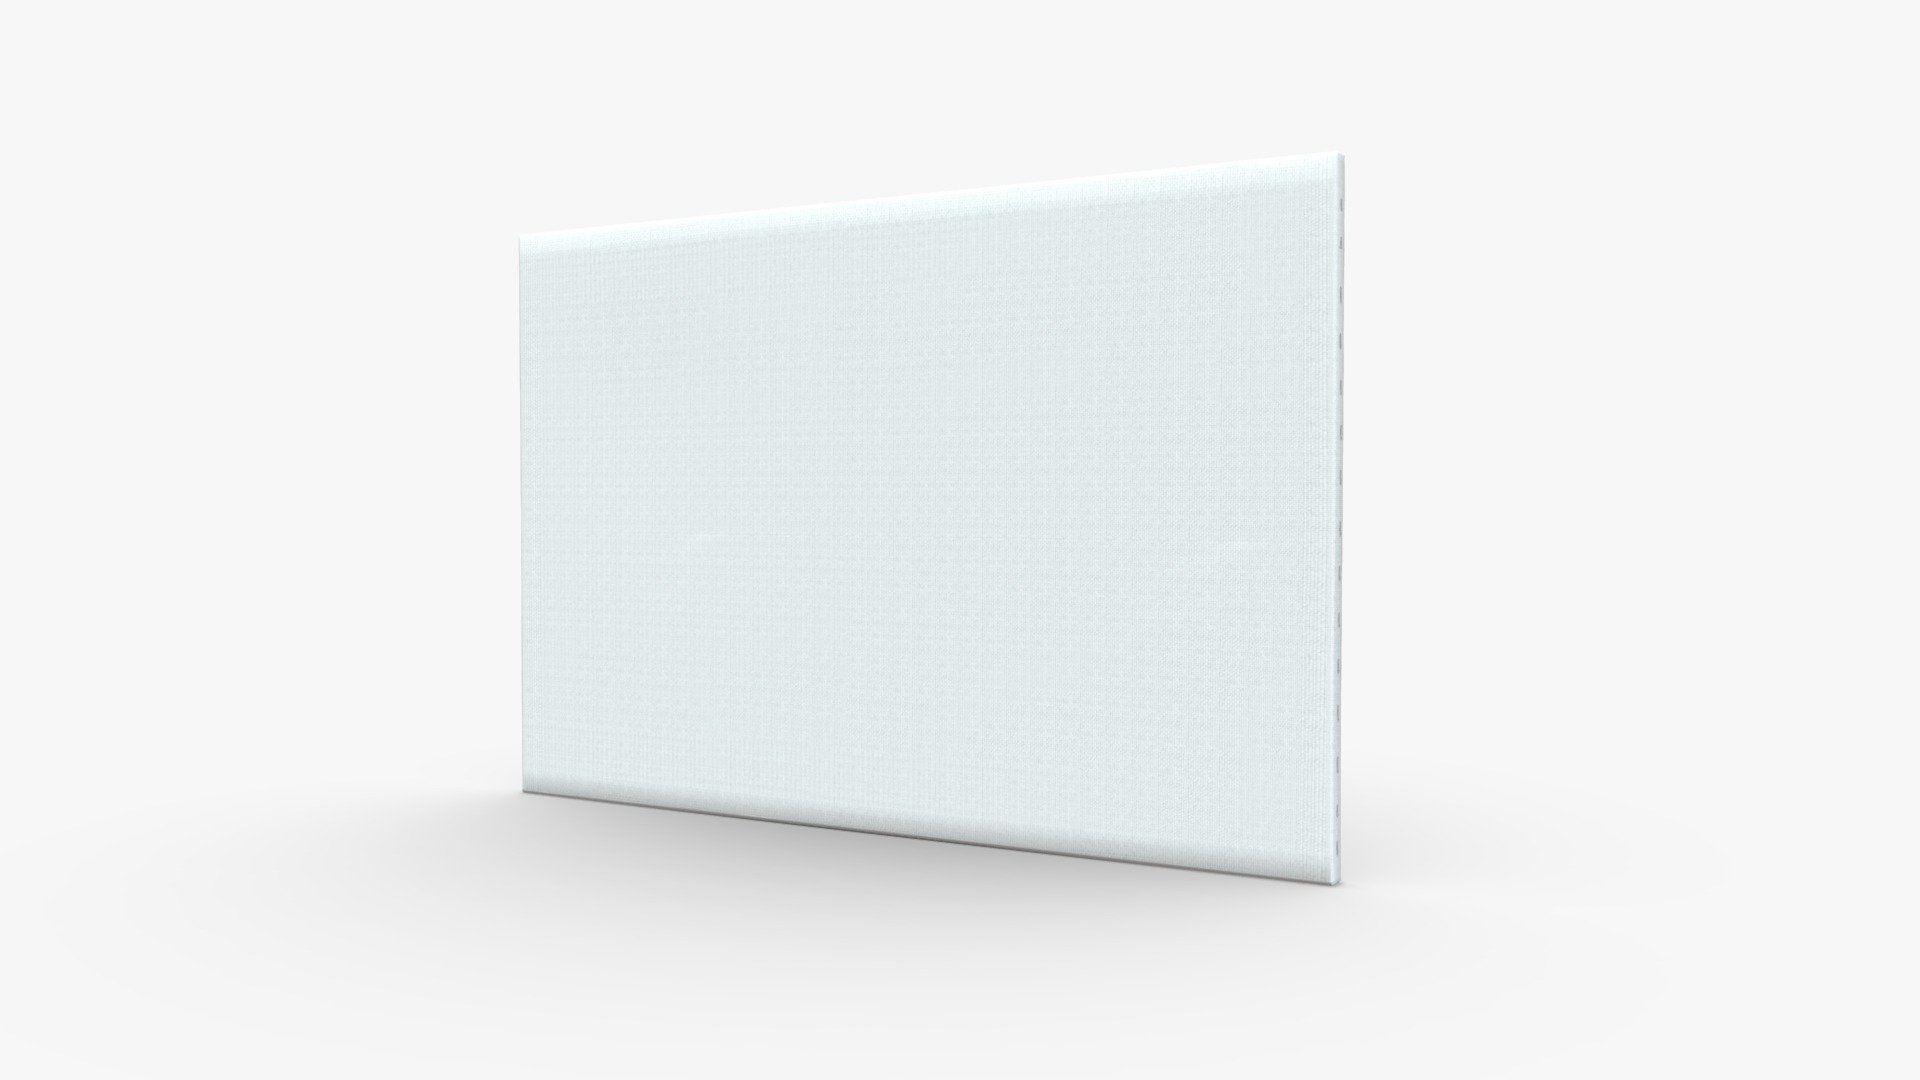 Check out my website for more products and better deals! &gt;&gt; SM5 by Heledahn &lt;&lt;

This is a 3D Model of a Blank Canvas, stapled to a pine woodframe. The canvas is empty of any paint, and it can be used as is, or apply to it any texture on top to simulate a finished painting.

This product will achieve realistic results in your rendering projects and animations, being greatly suited for close-ups due to their high quality topology and PBR shading 3d model